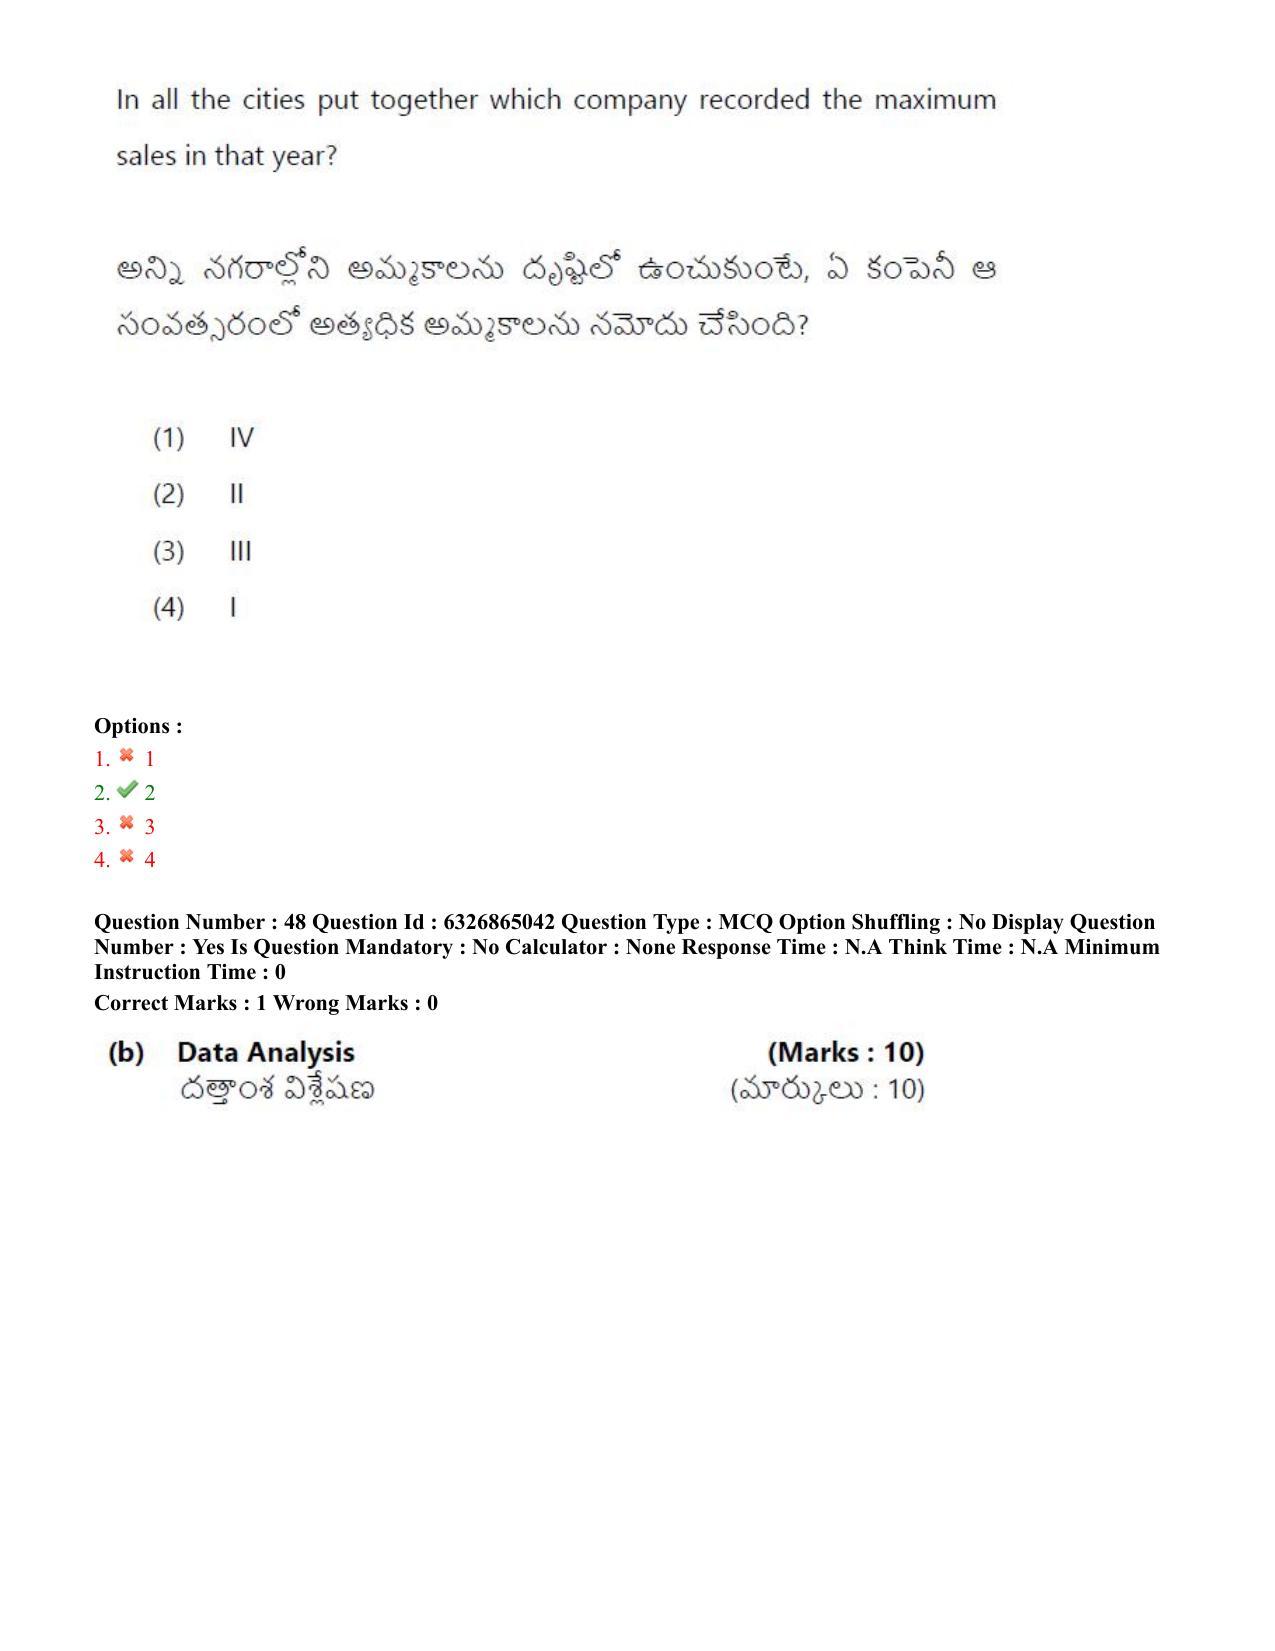 TS ICET 2022 Question Paper 2 - Jul 28, 2022	 - Page 42